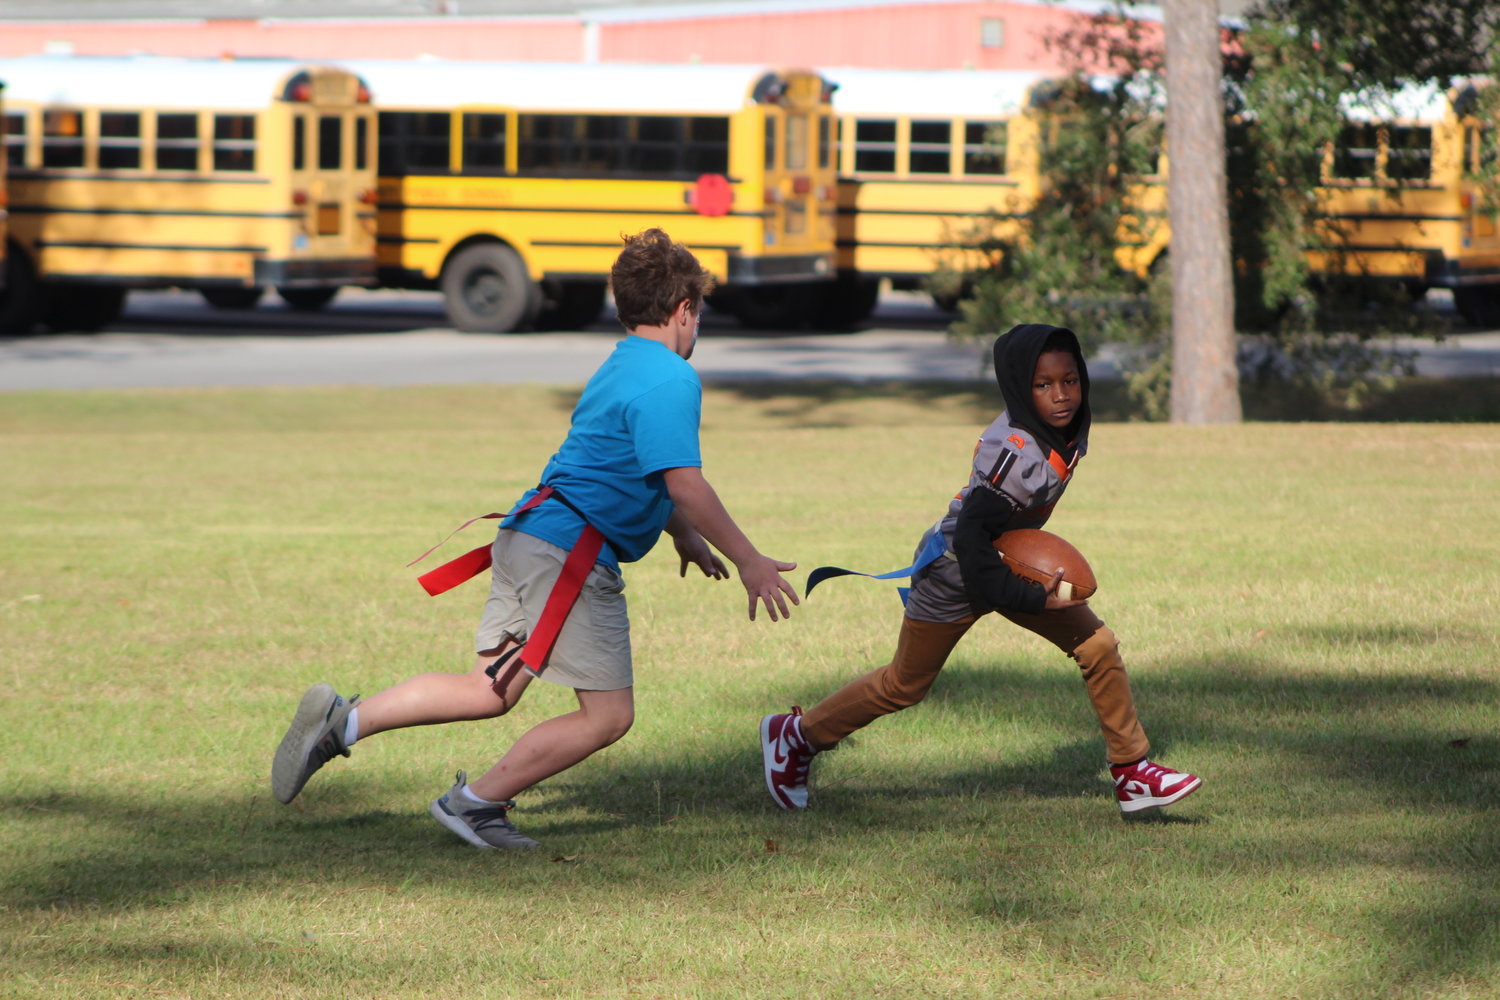 The Bay Minette Elementary School Super Bowl flag football playoffs began last Friday, Sept. 30, and will look to crown the top team after the nine-week regular season.